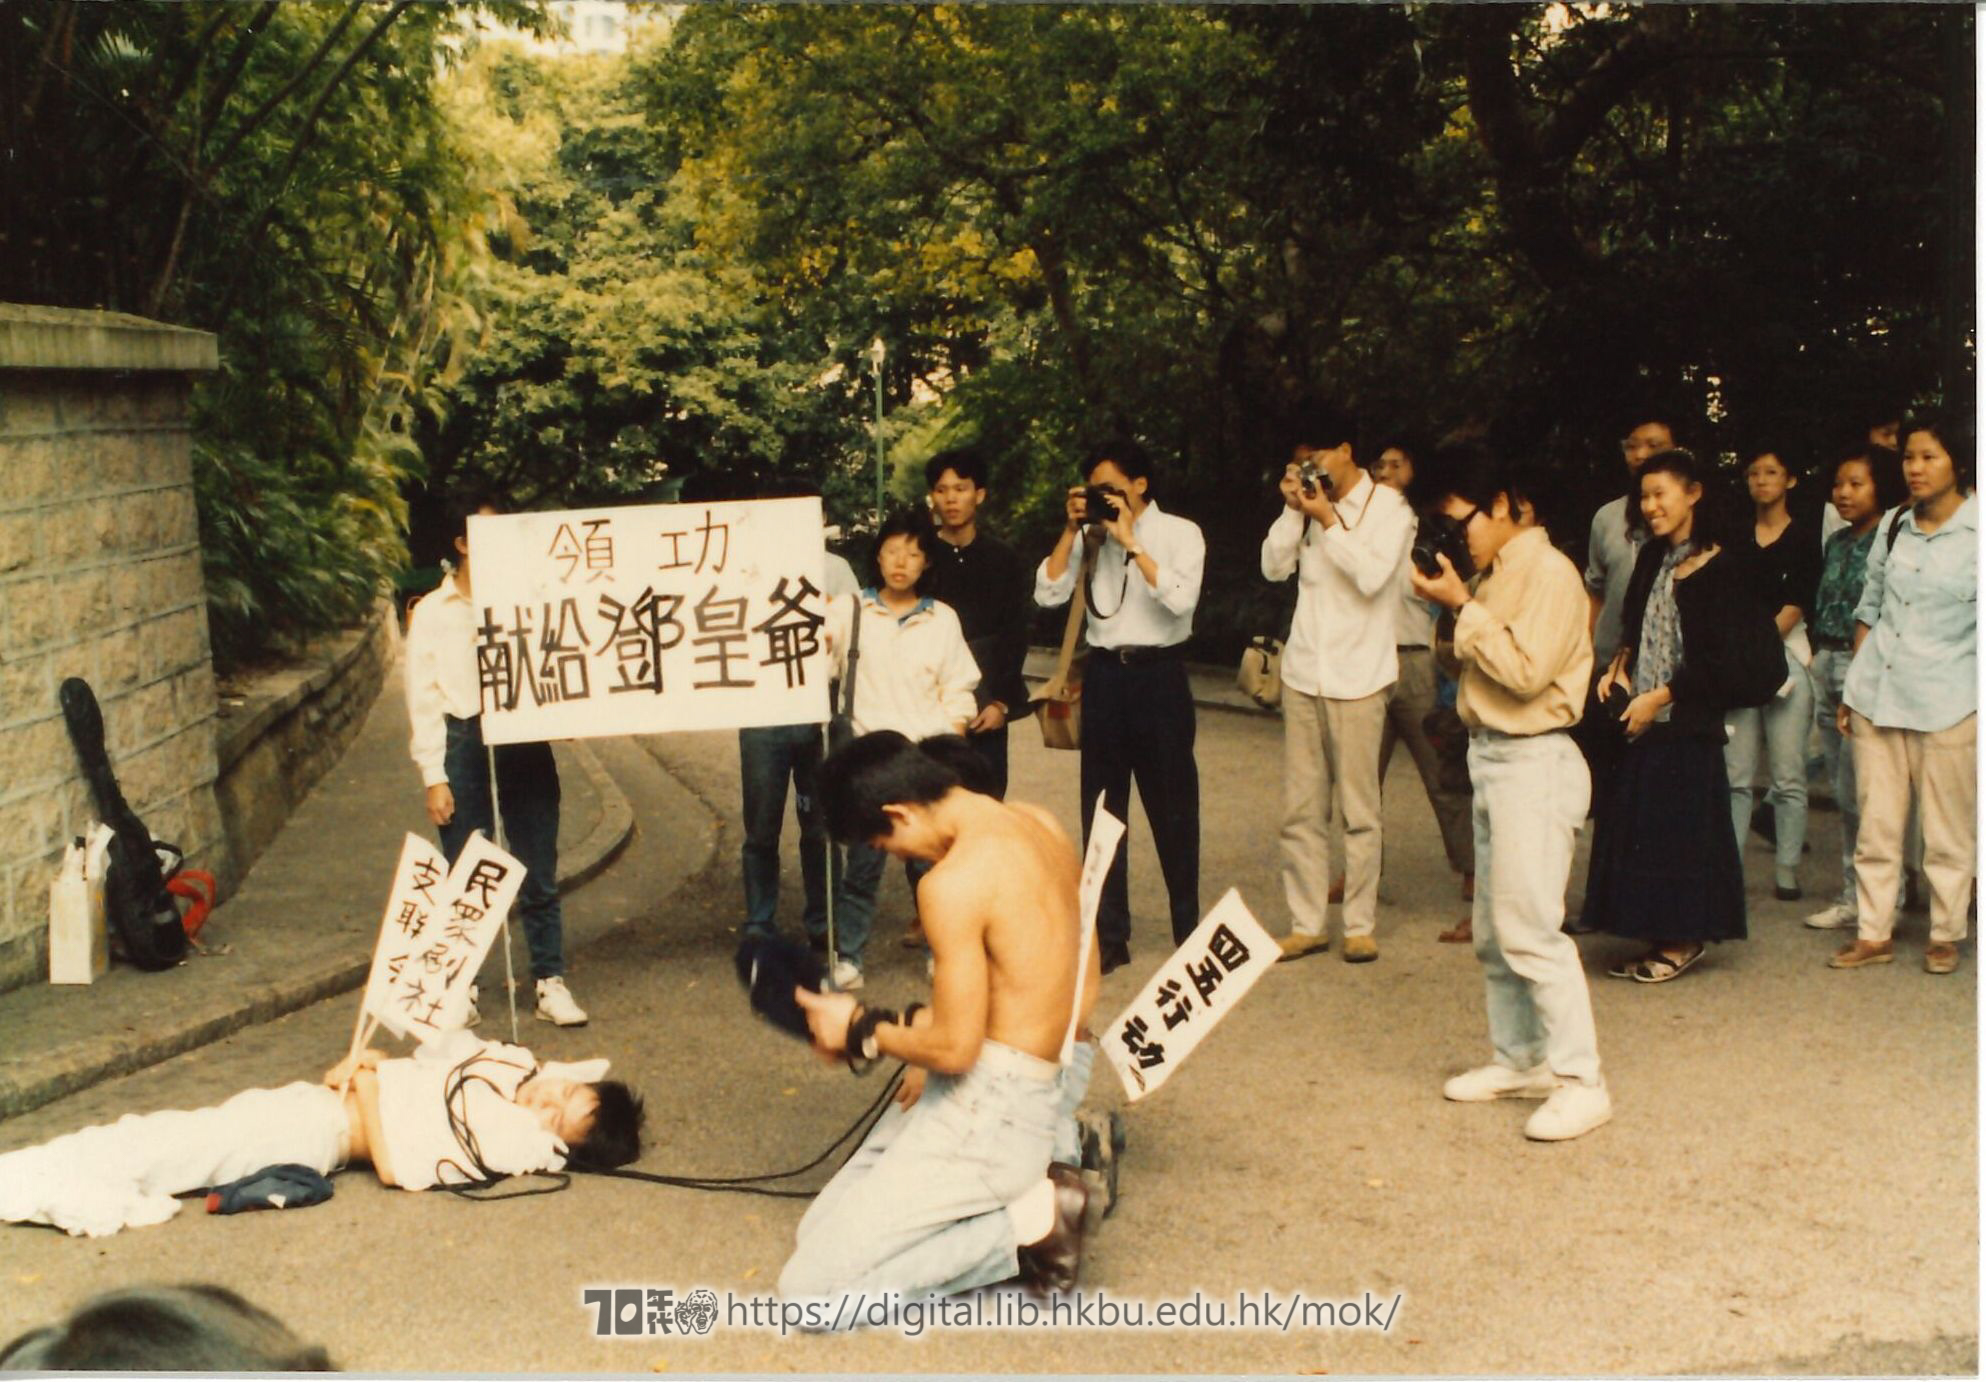   Street theatre after June 4th, 1989  